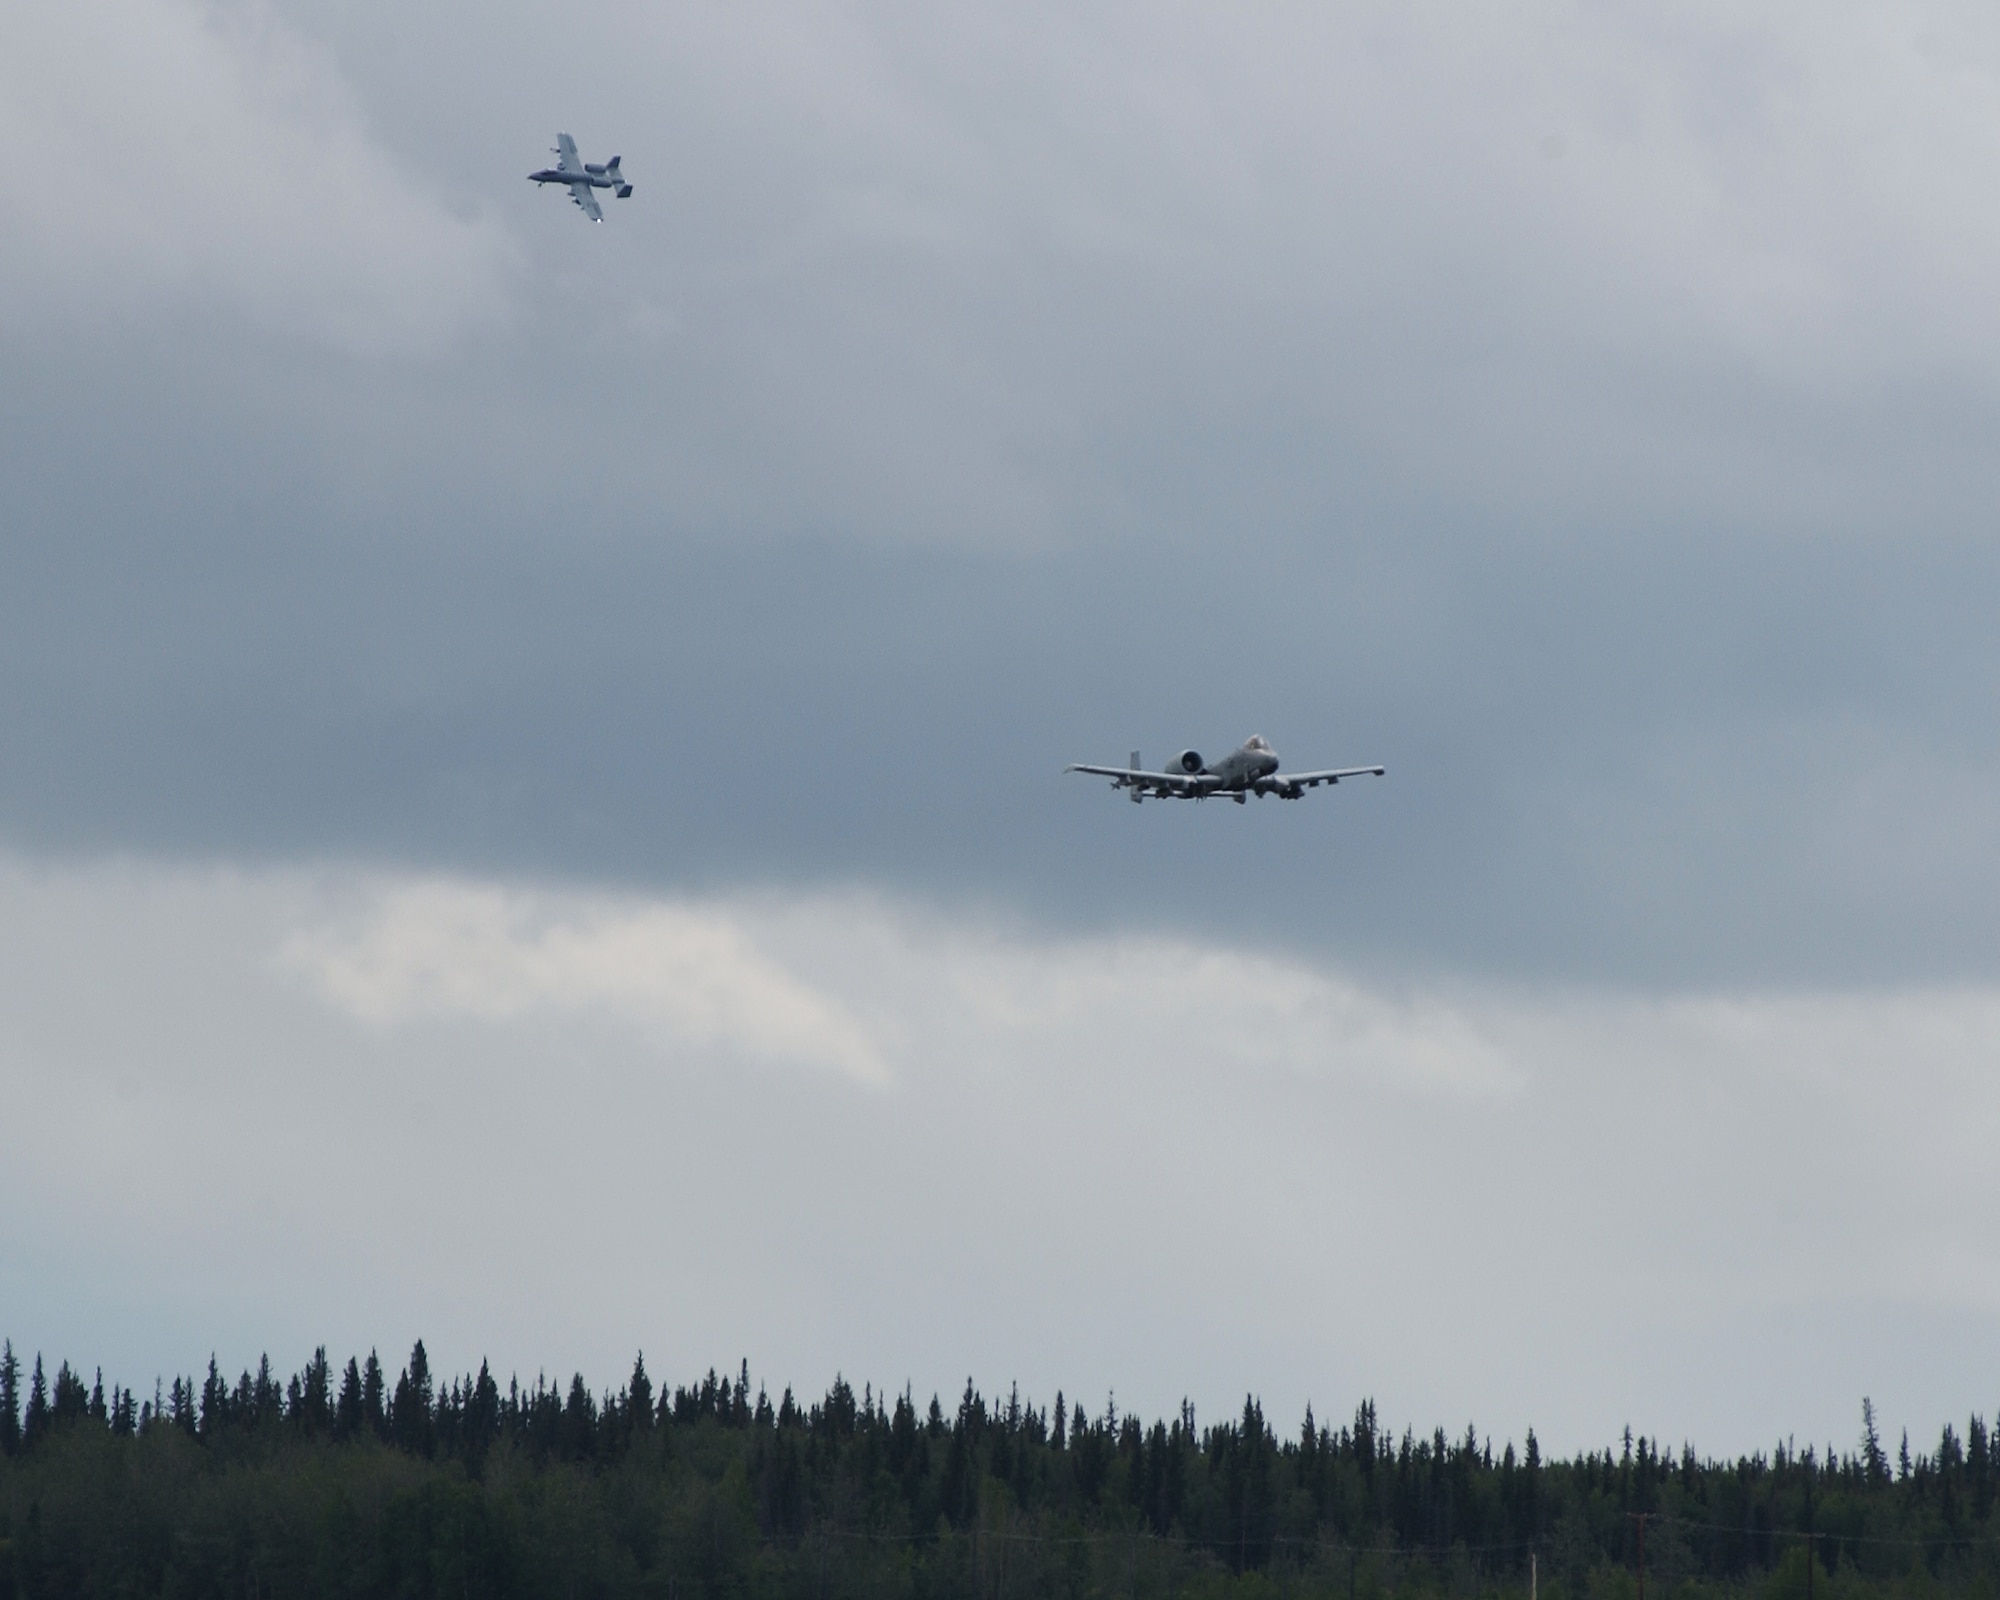 EIELSON AIR FORCE BASE, Alaska -- Two A-10 Thunderbolts from the 355th Fighter Squadron conduct their last flight over the flightline July 31. The first two A-10's arrived at Eielson on December 18, 1981, while the last two A-10's are set to leave on August 15, 2007 to Moody AFB, Ga., and Mountain Home AFB, Idaho (U.S. Air Force Photo by Airman 1st Class Jonathan Snyder)